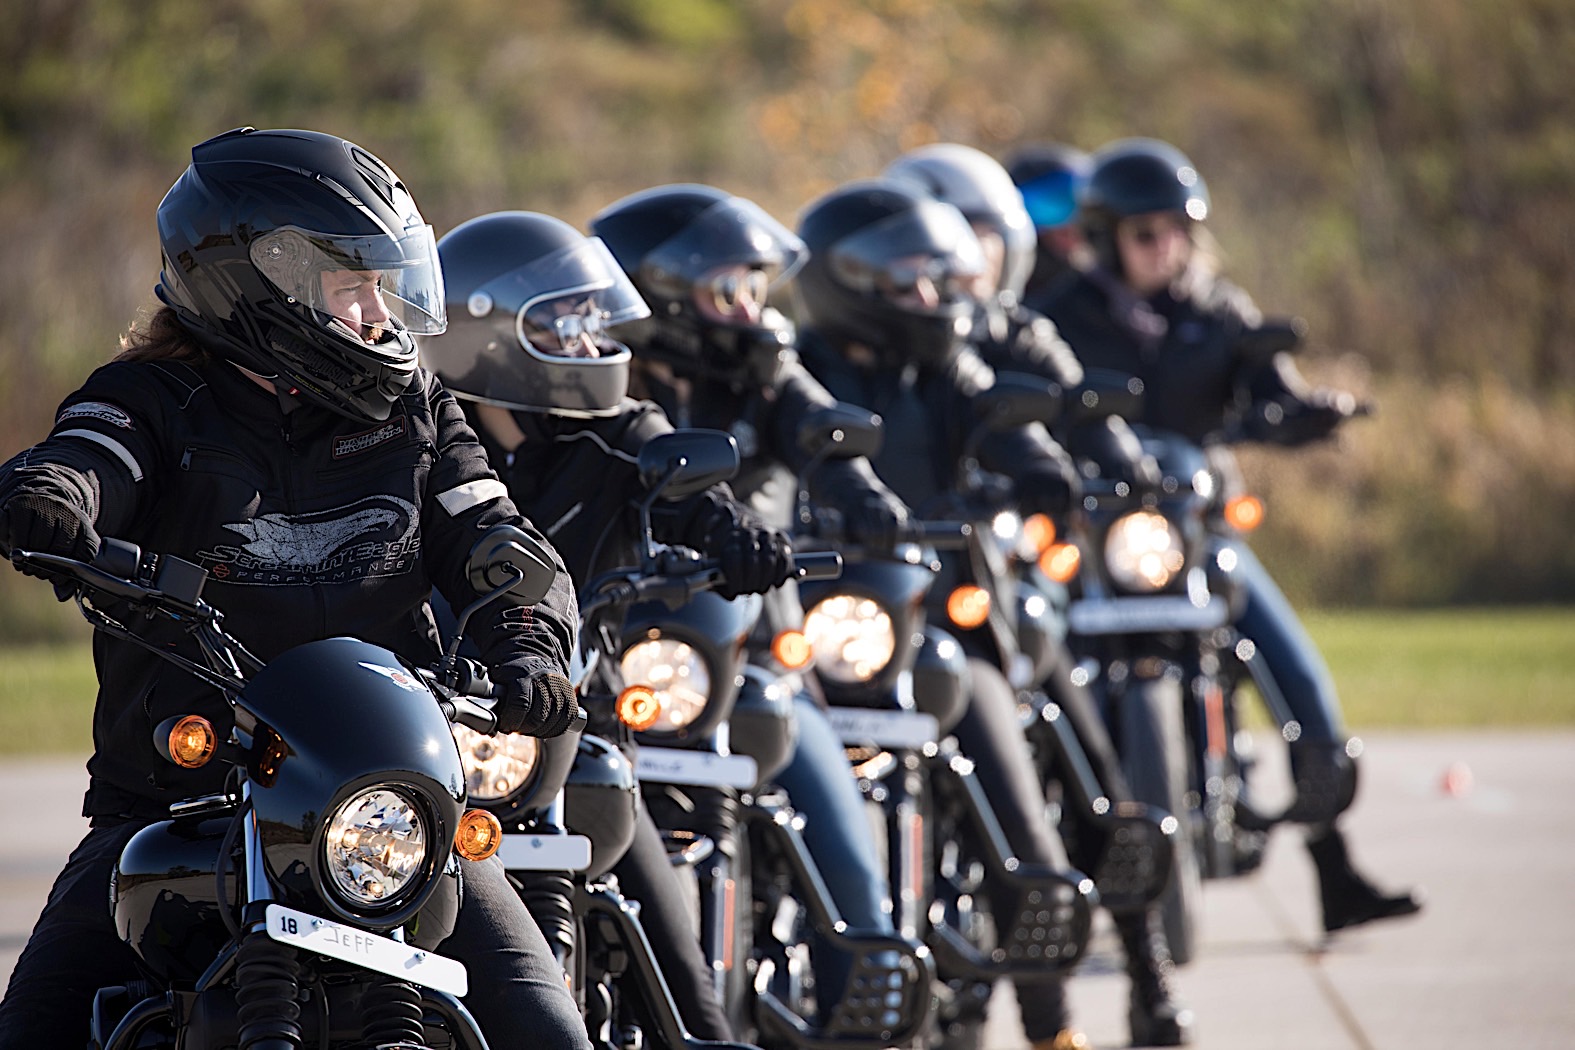 Harley Davidson To Start Teaching 500 People How To Ride Motorcycles For Free Autoevolution